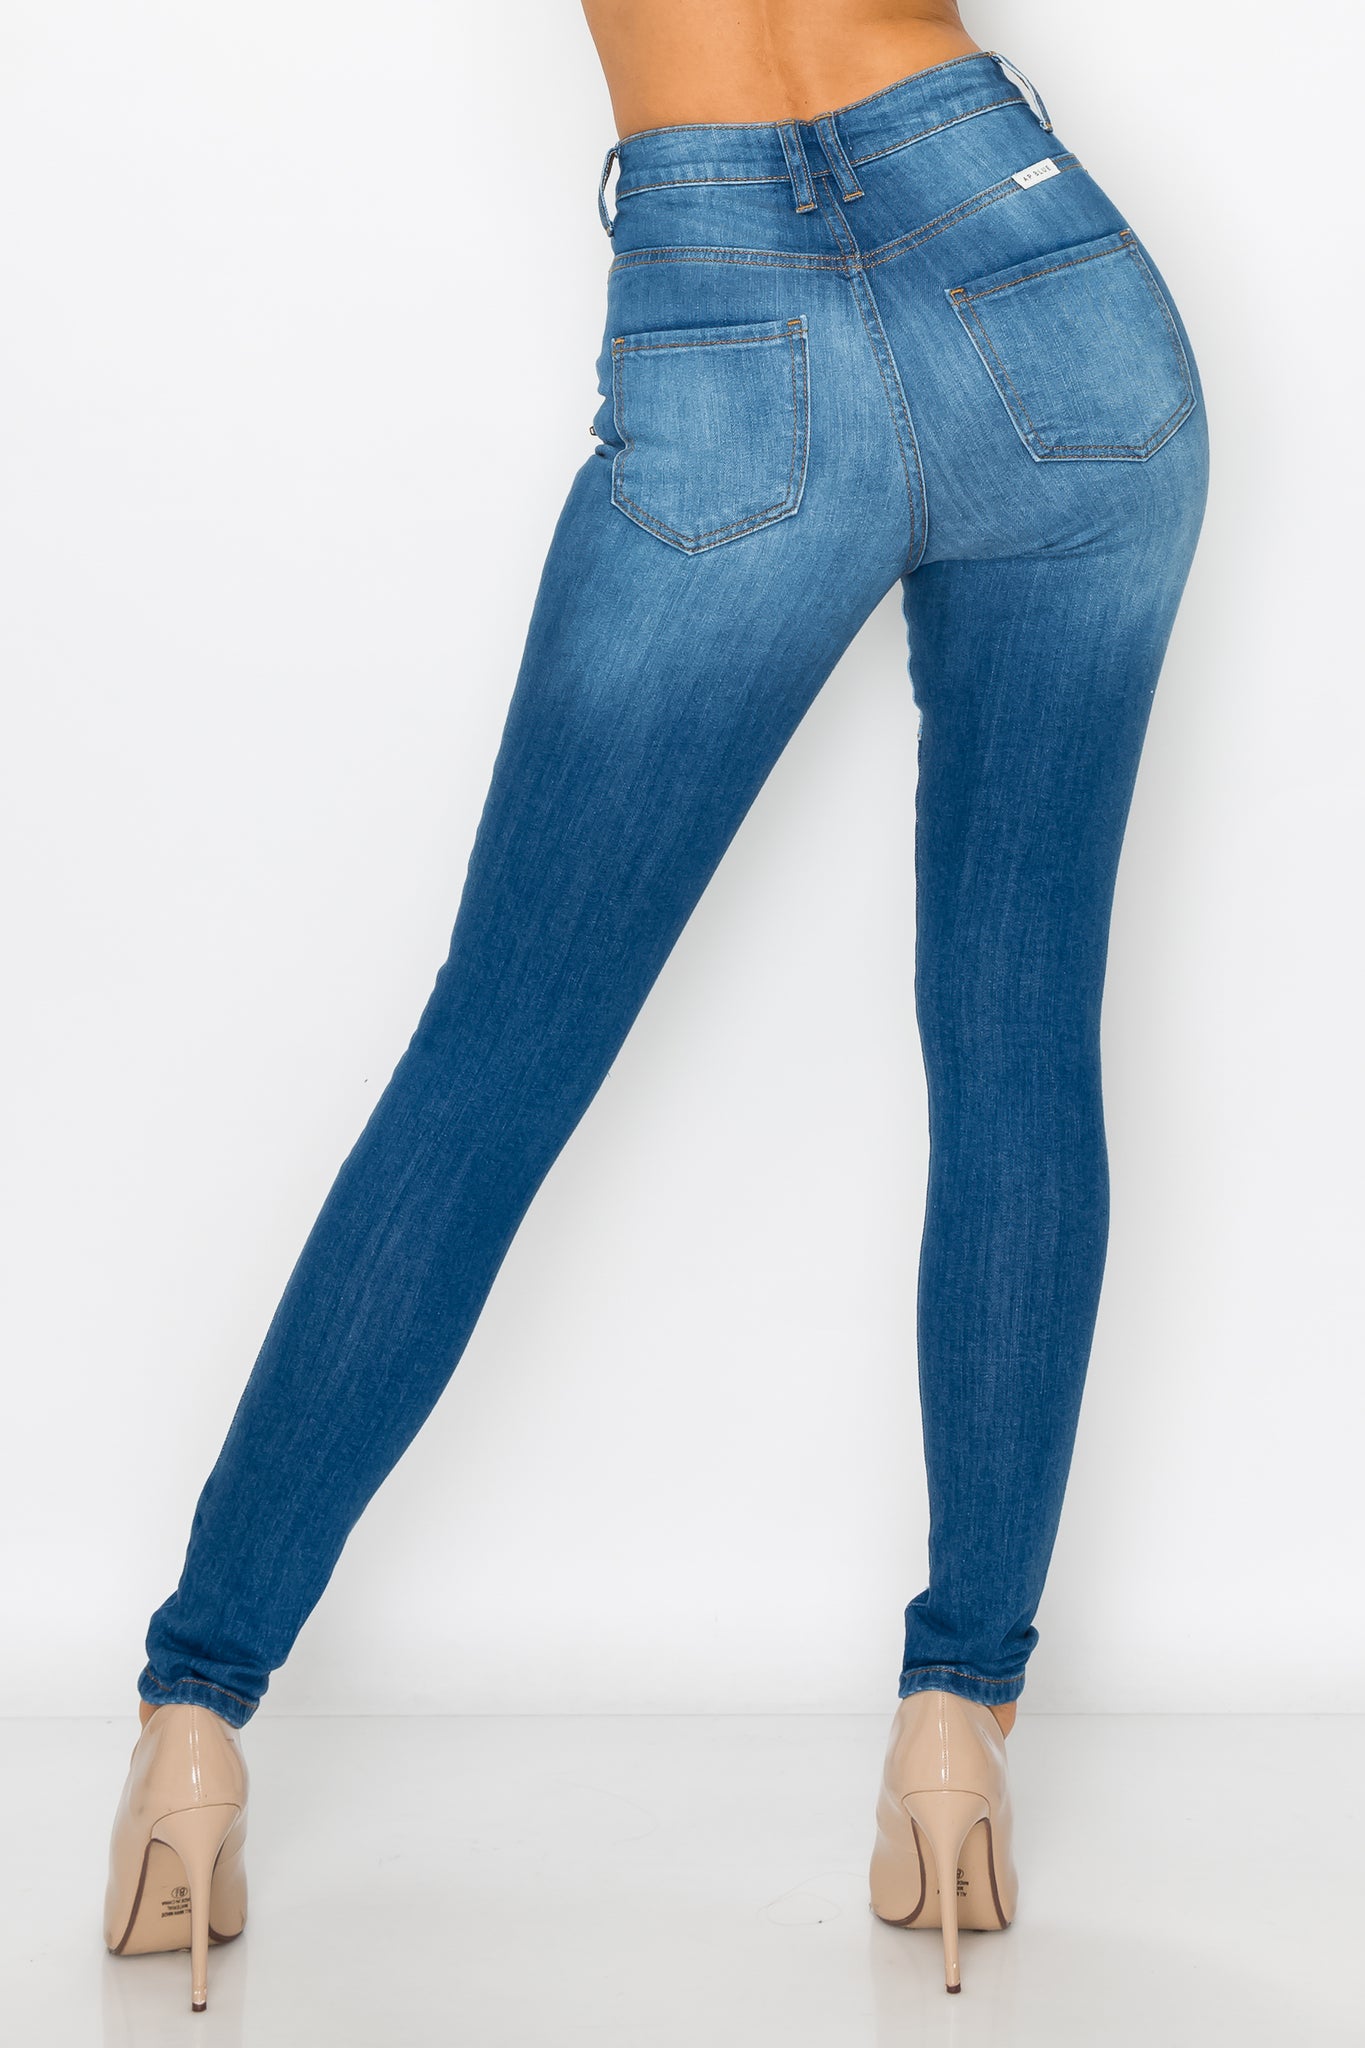 Flare Jeans – Outs Distressed Waisted Cut Aphrodite with Super Jeans High